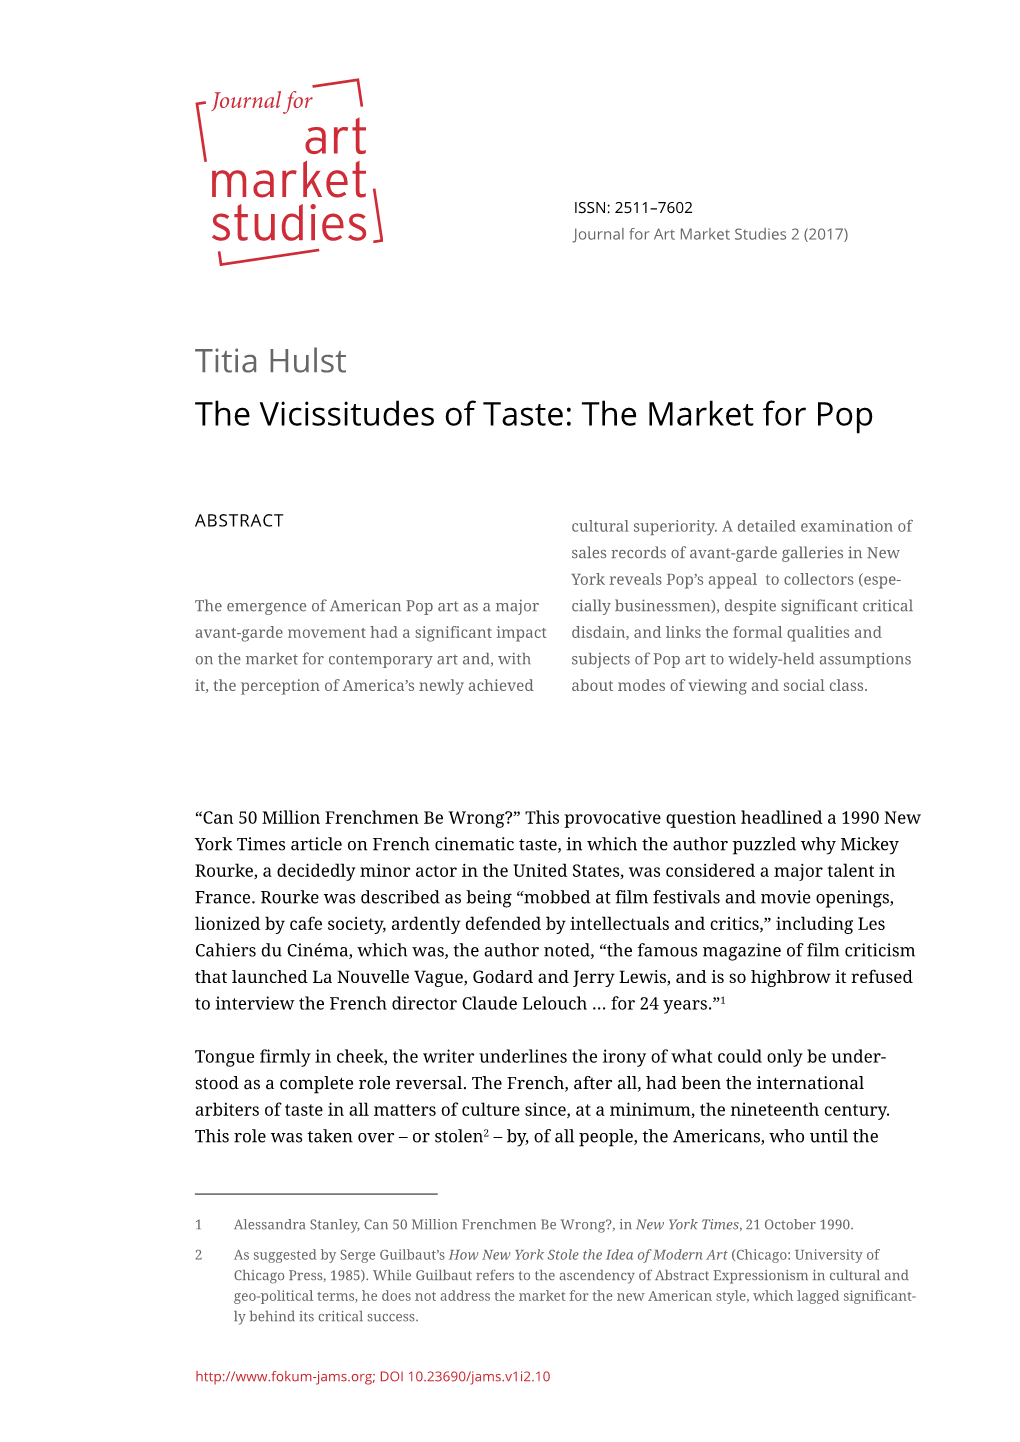 Titia Hulst the Vicissitudes of Taste: the Market for Pop